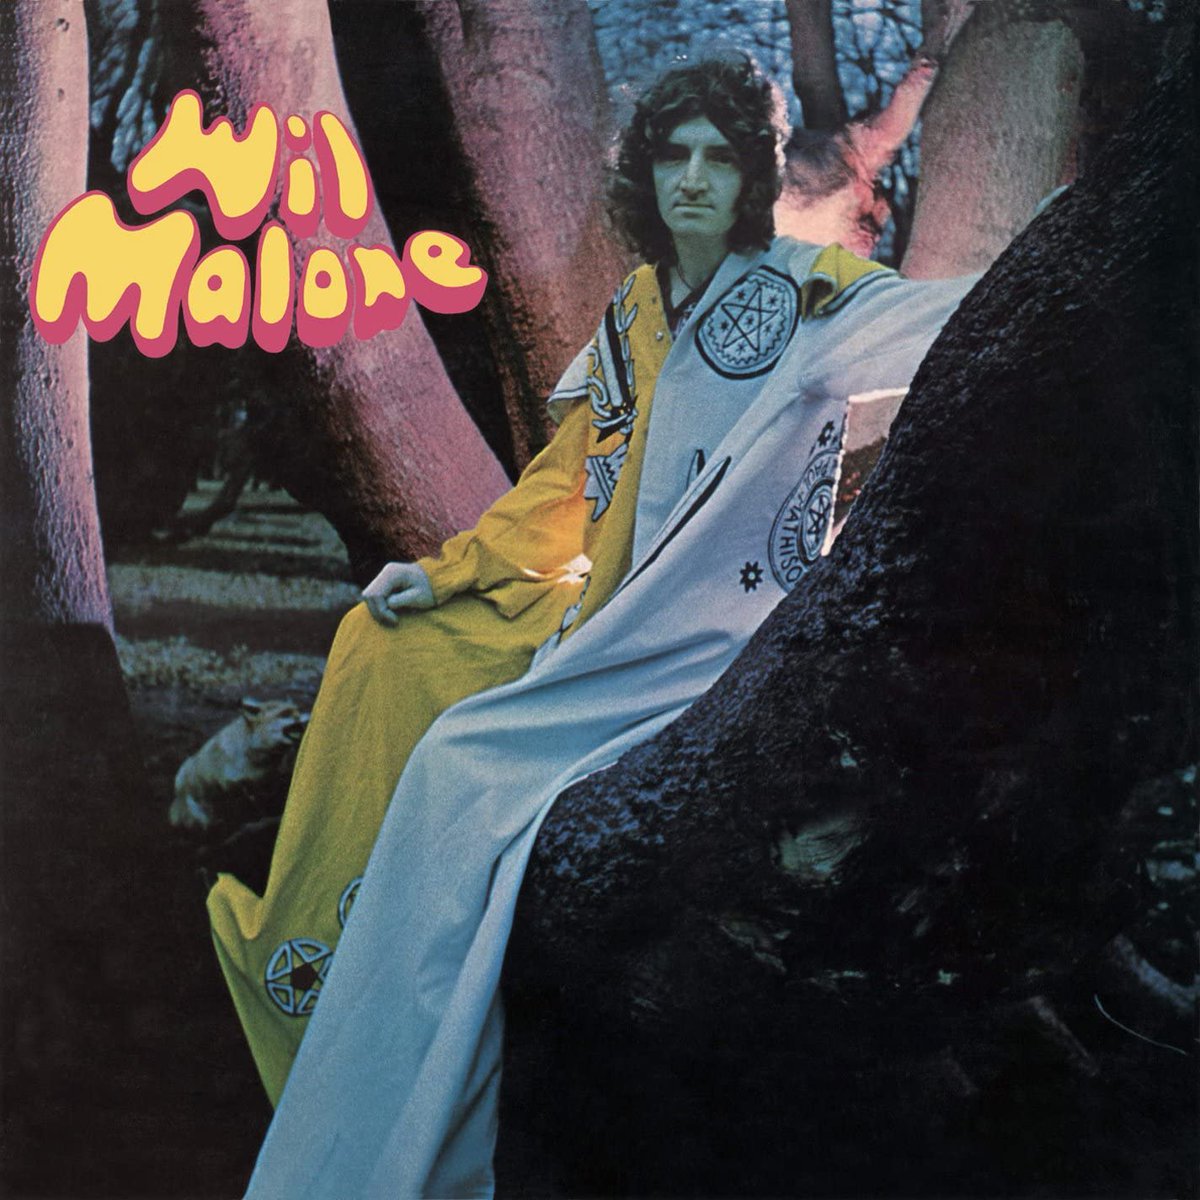 Back to Unfinished Sympathy and it's arguably the strings which elevated it from a great song to legendary status. Thank orchestrator Wil Malone for that. Here's an early record by Wil, from his eponymous LP from 1970 